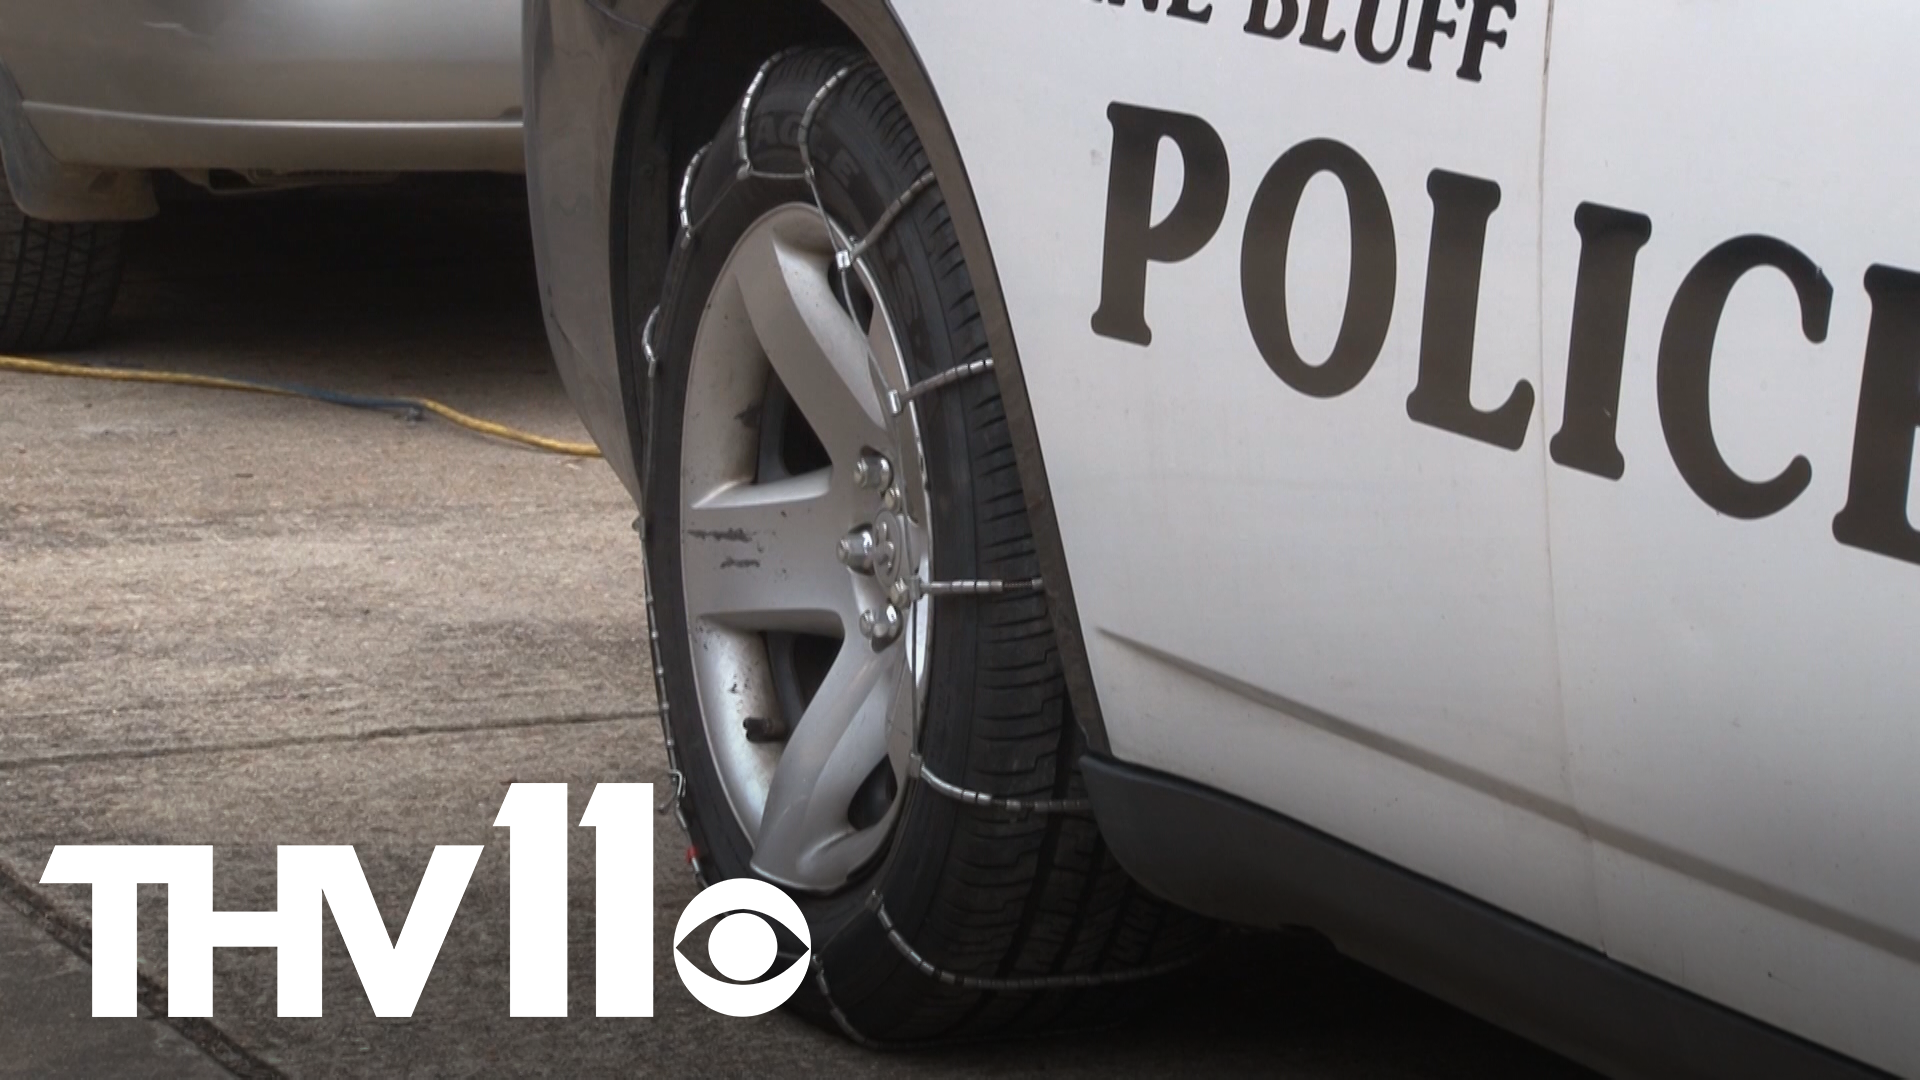 The City of Pine Bluff is preparing for the upcoming severe winter weather.